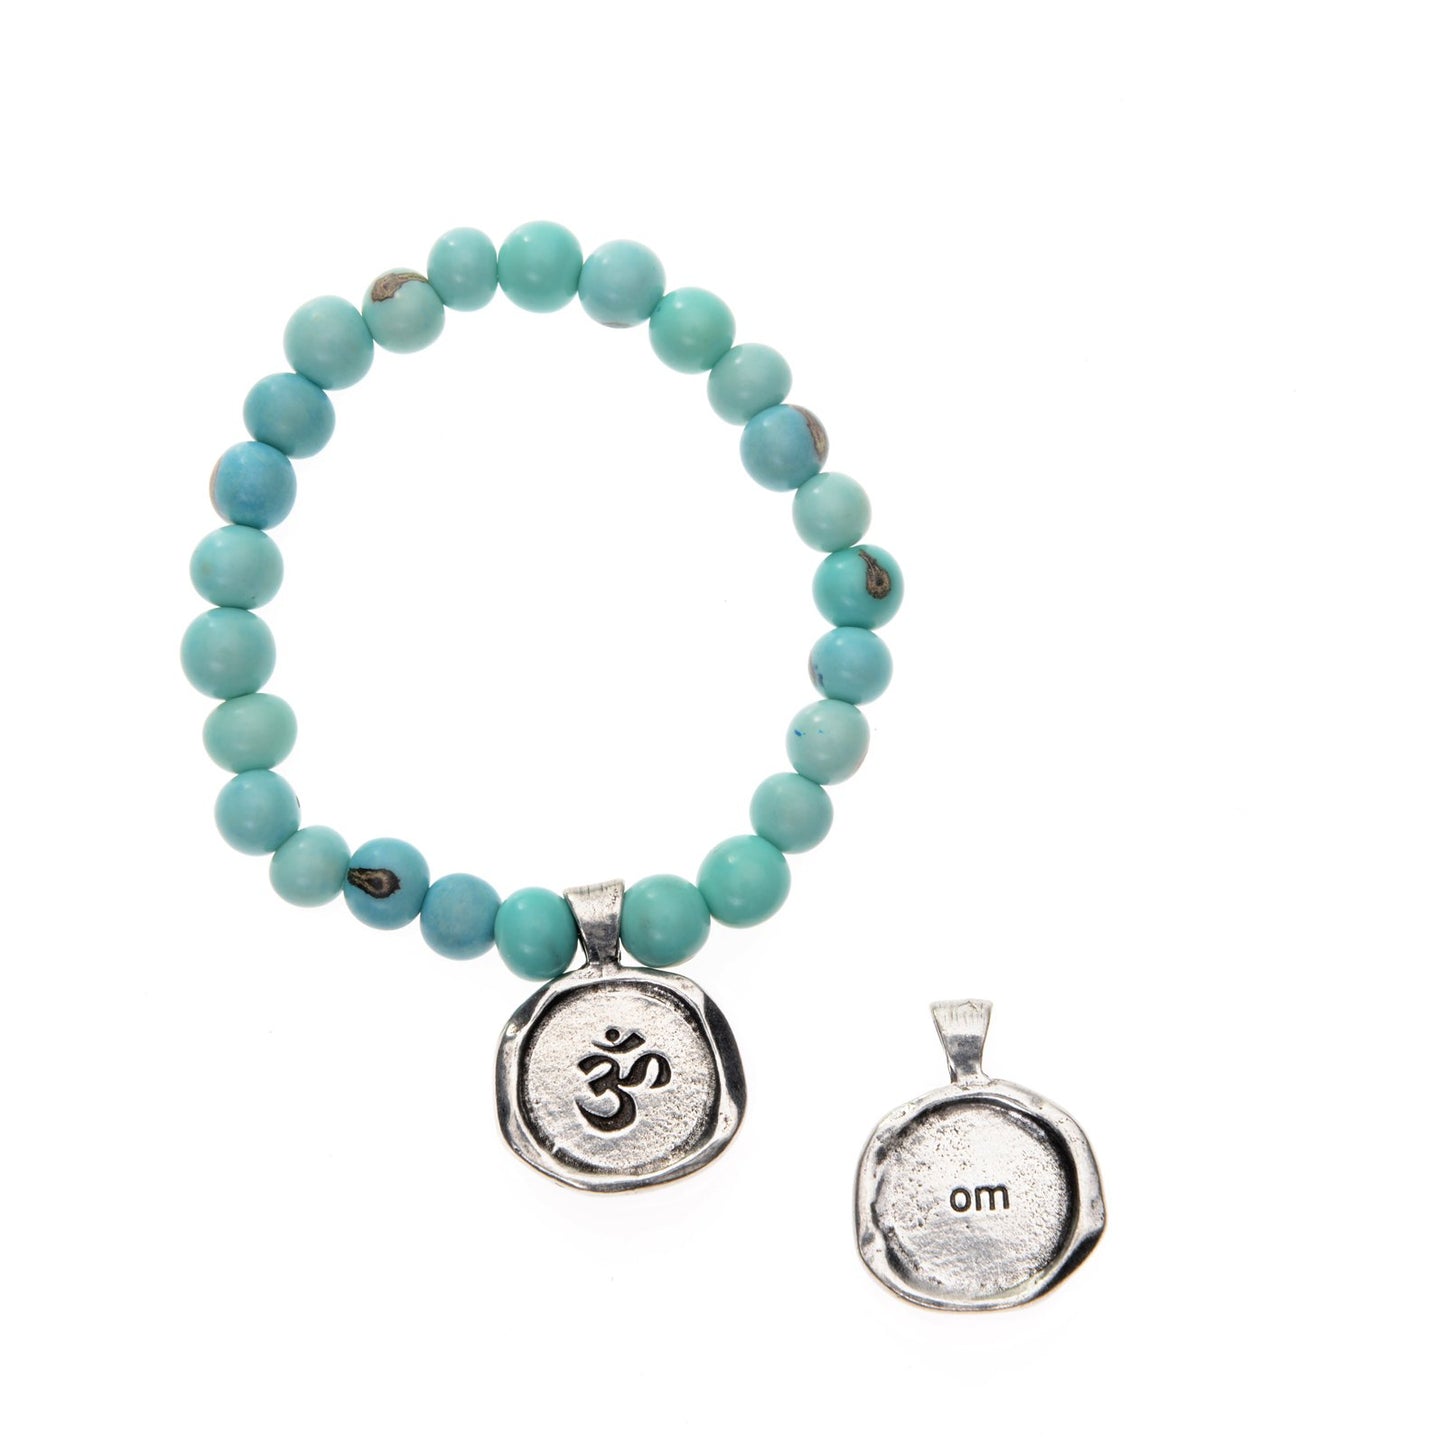 Turquoise Acai Seeds of Life Bracelet with Wax Seal - Whitney Howard Designs